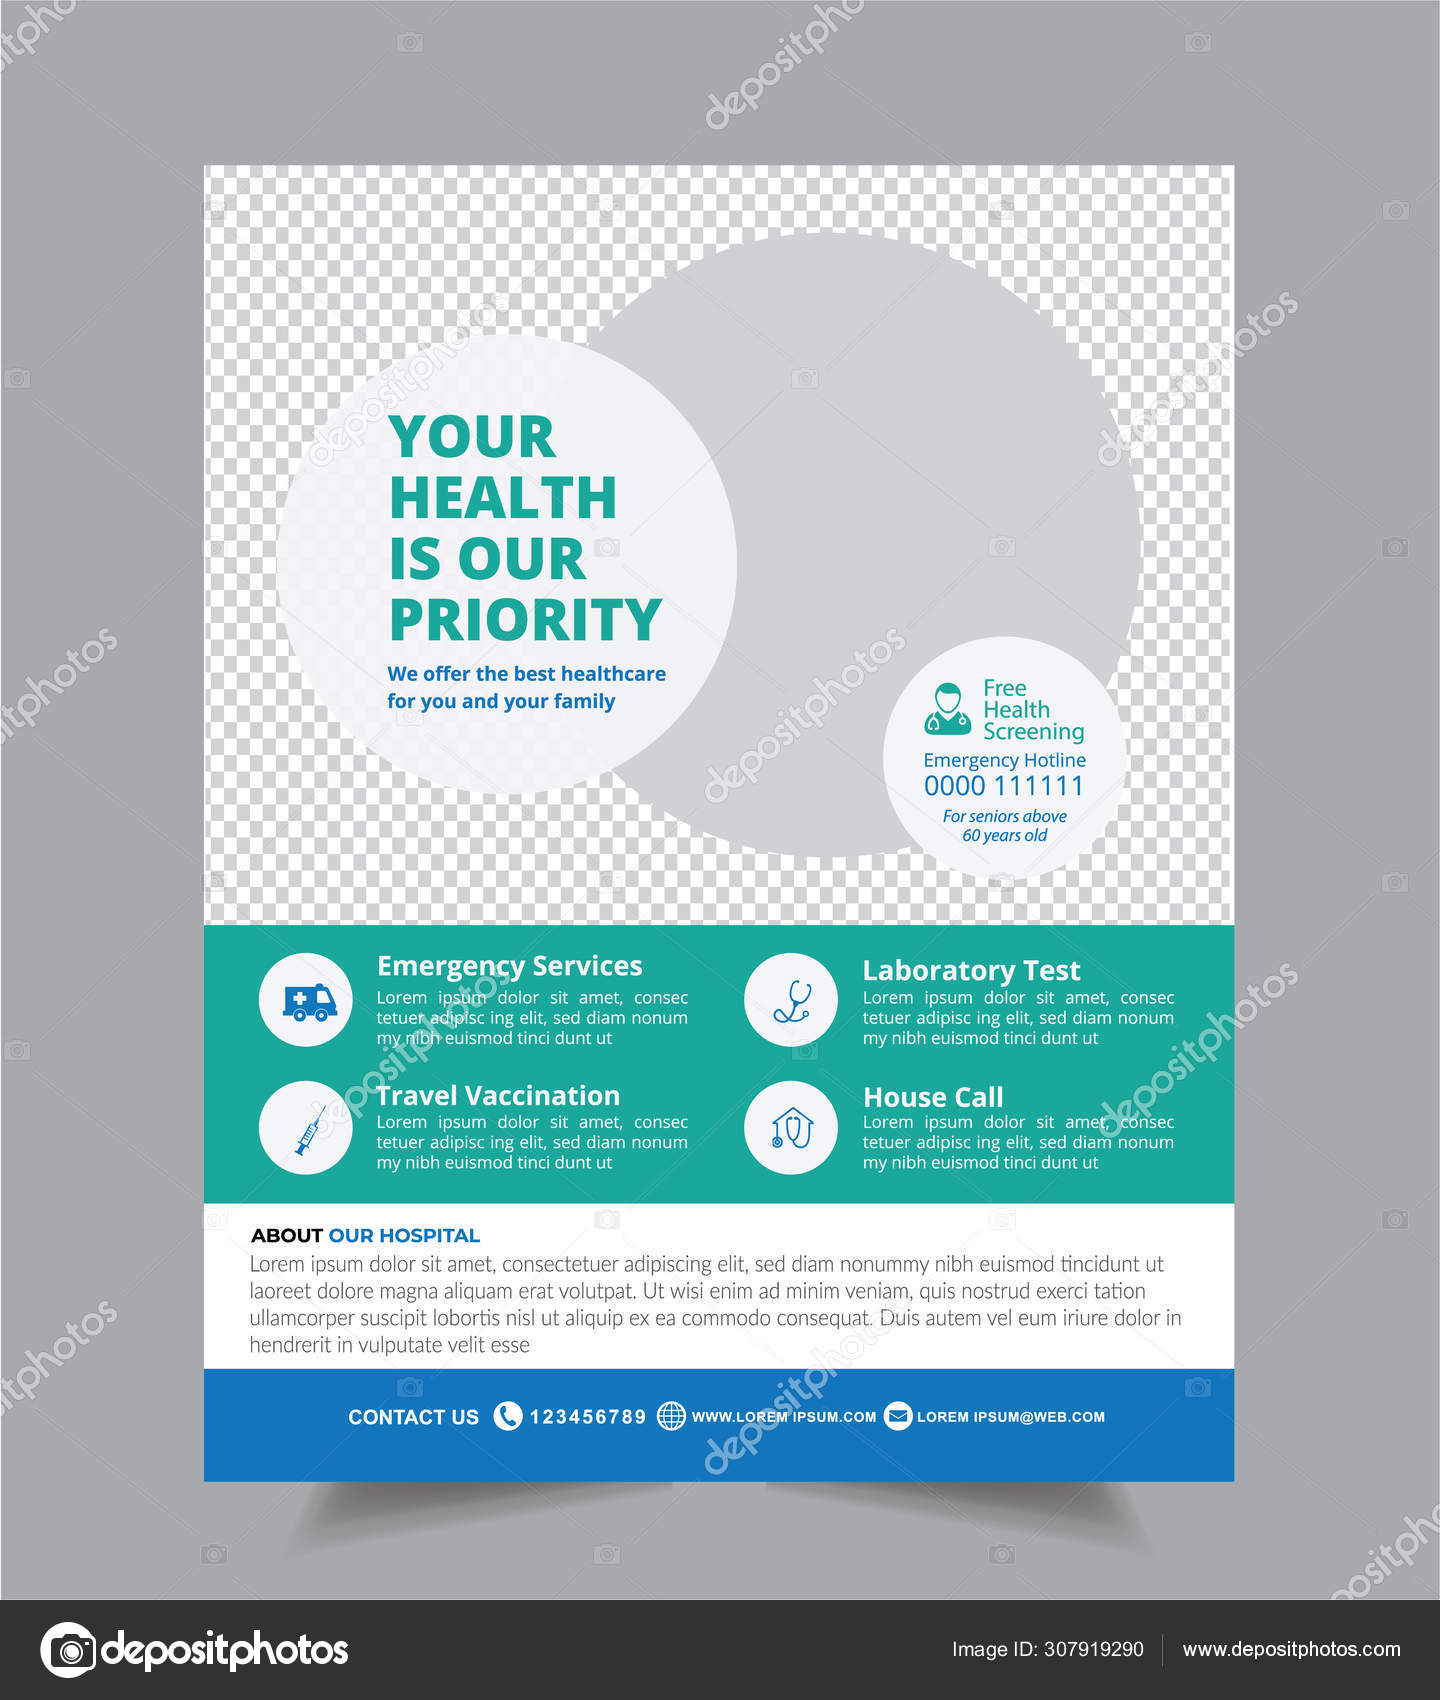 Medical Hospital Health Care Cover Template Design Report Medical In Healthcare Brochure Templates Free Download